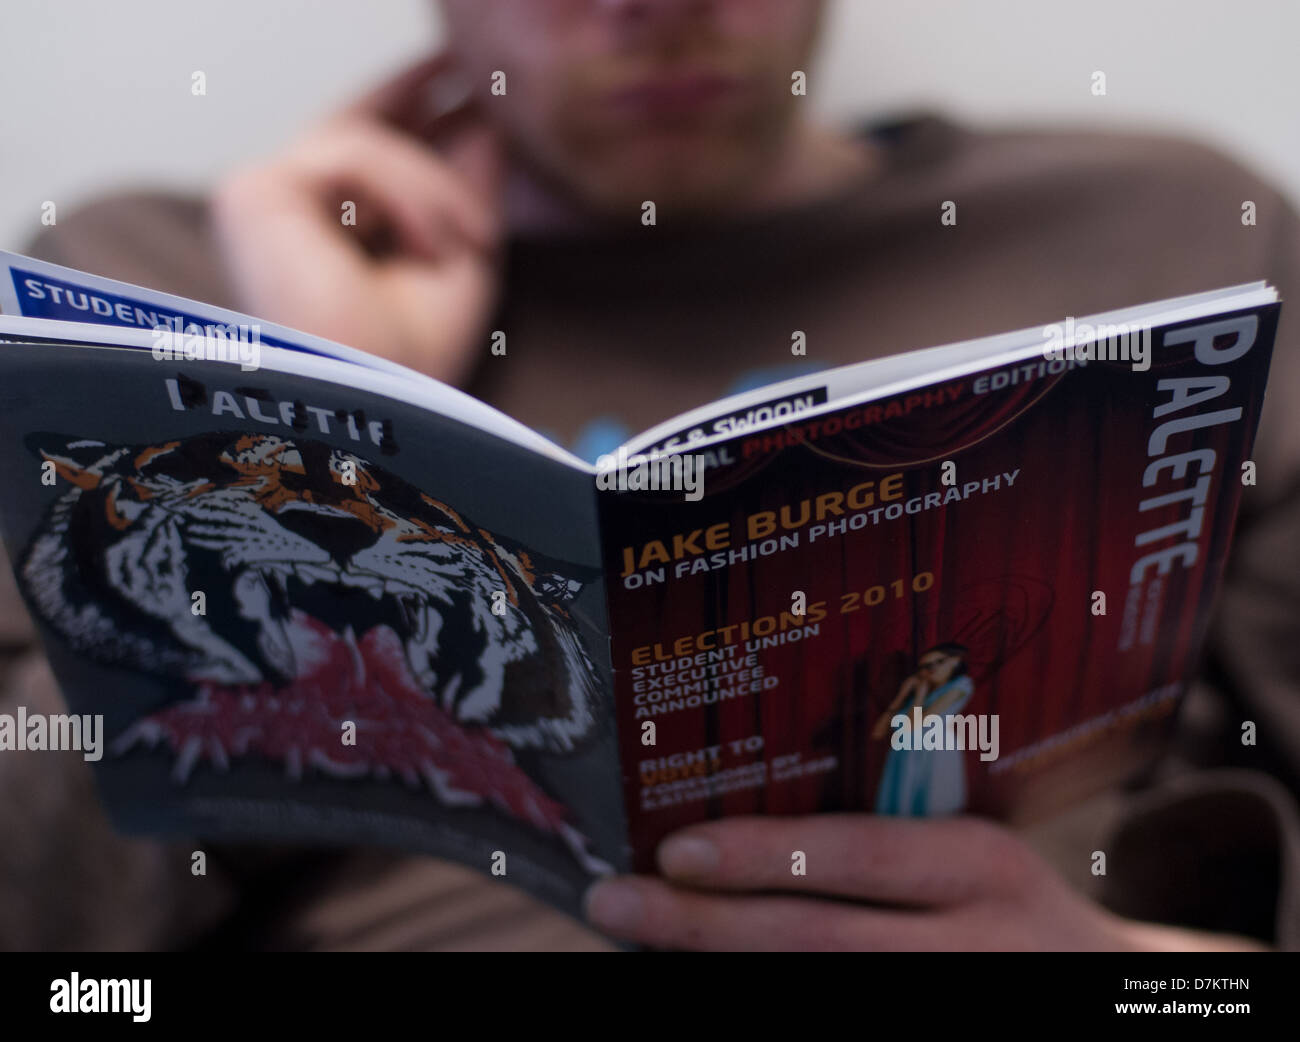 Image of a student reading Herefordshire Arts publication 'Palette', Hereford, England. Stock Photo